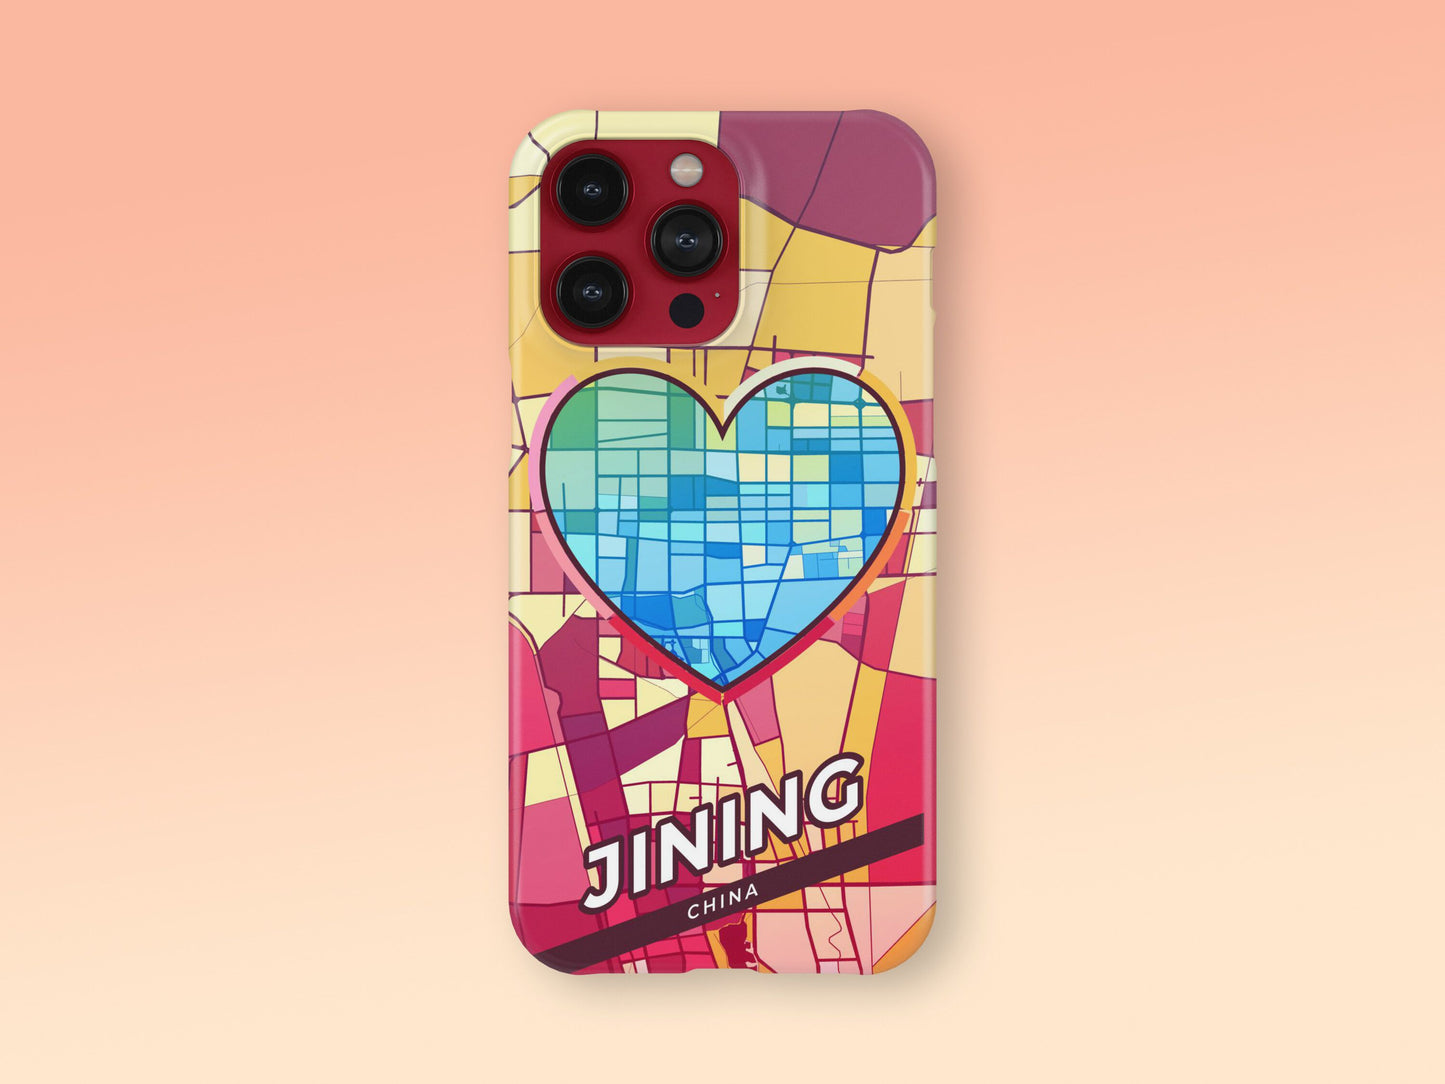 Jining China slim phone case with colorful icon. Birthday, wedding or housewarming gift. Couple match cases. 2